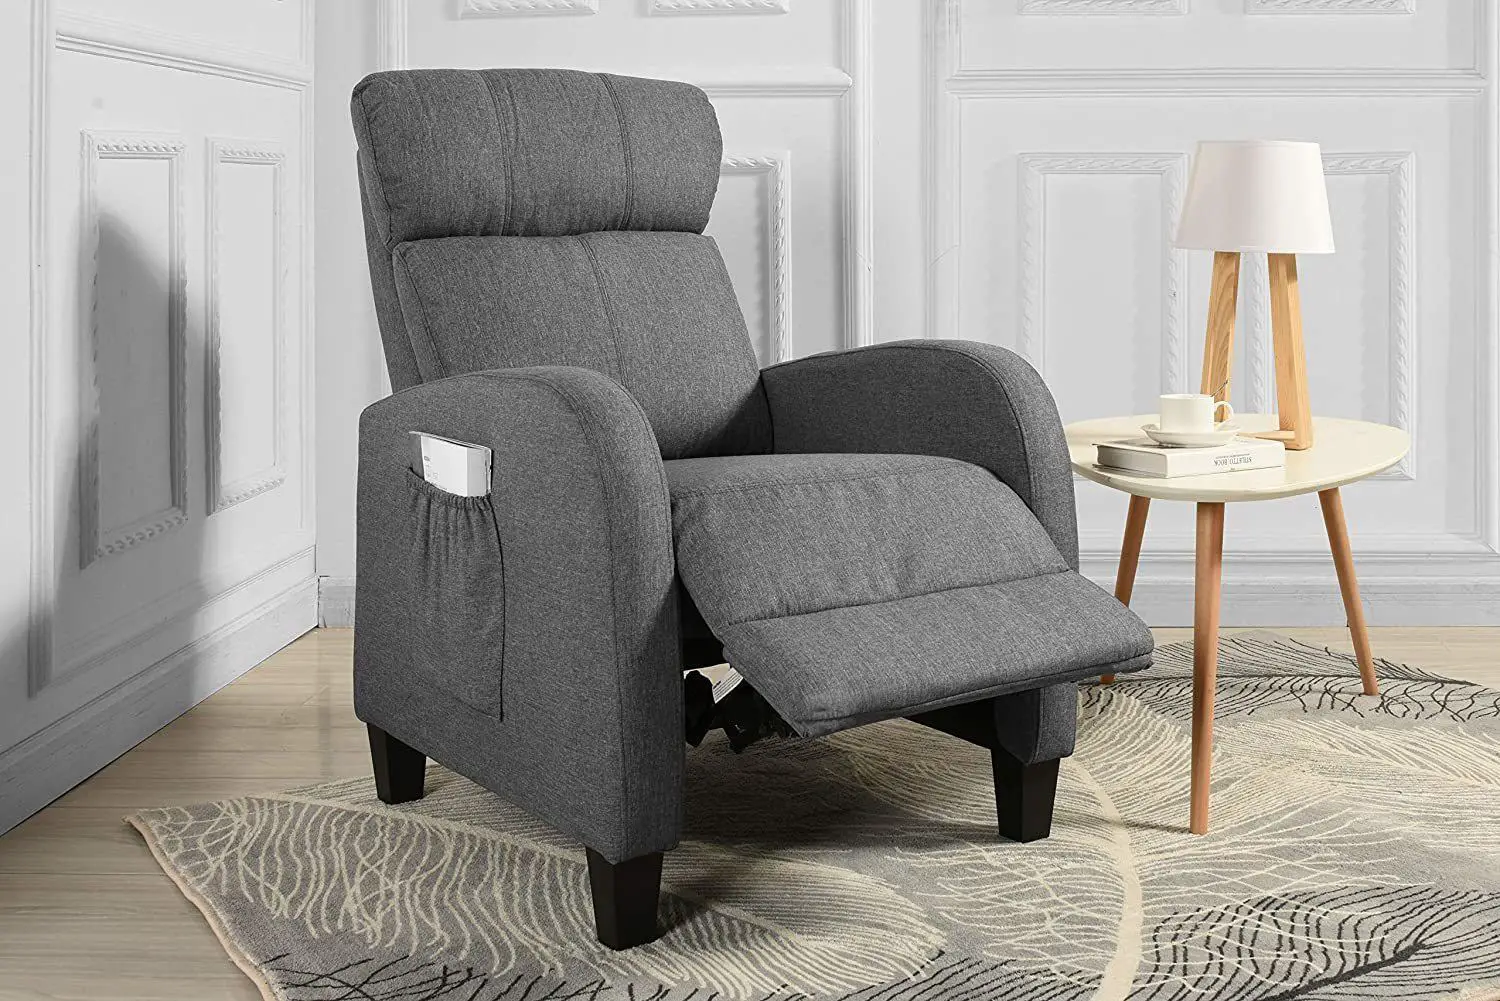 Best Living Room Chairs For Obese